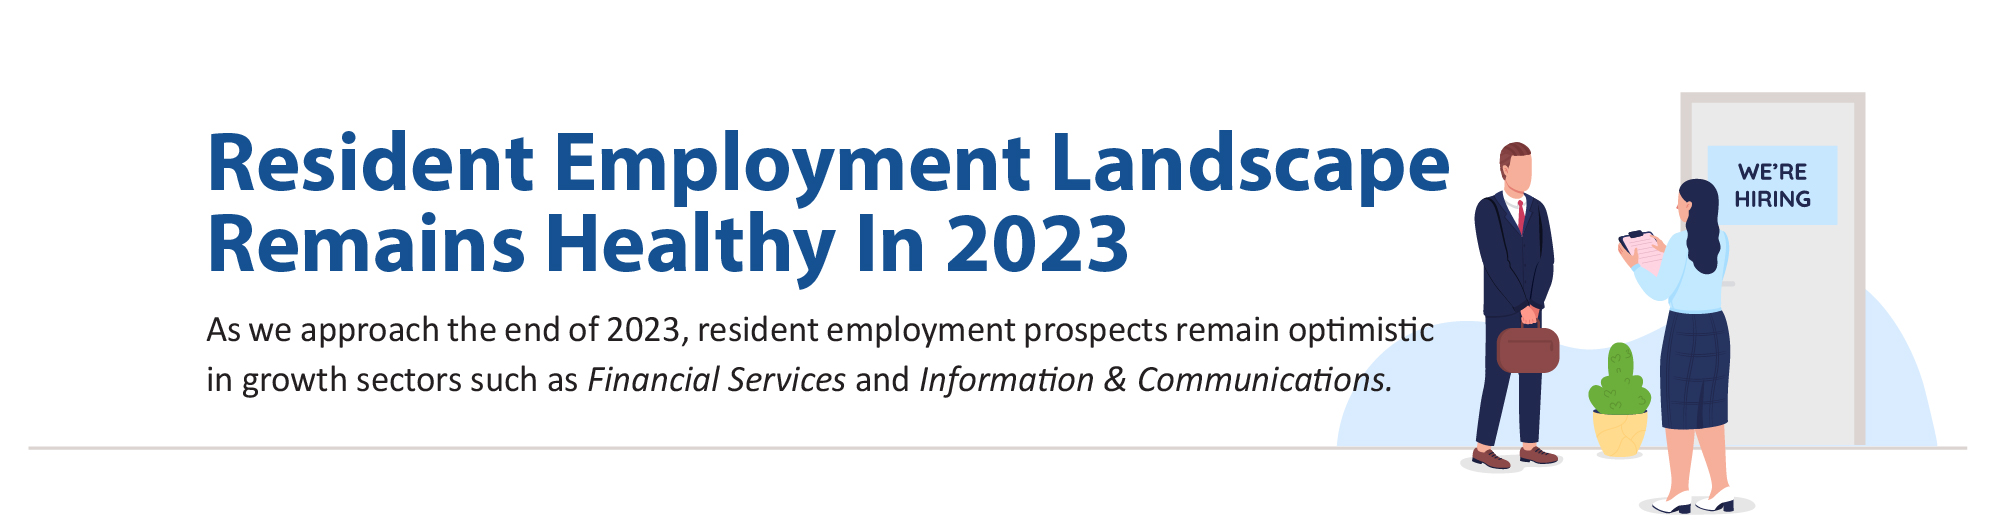 Resident Employment Landscape Remains Healthy in 2023